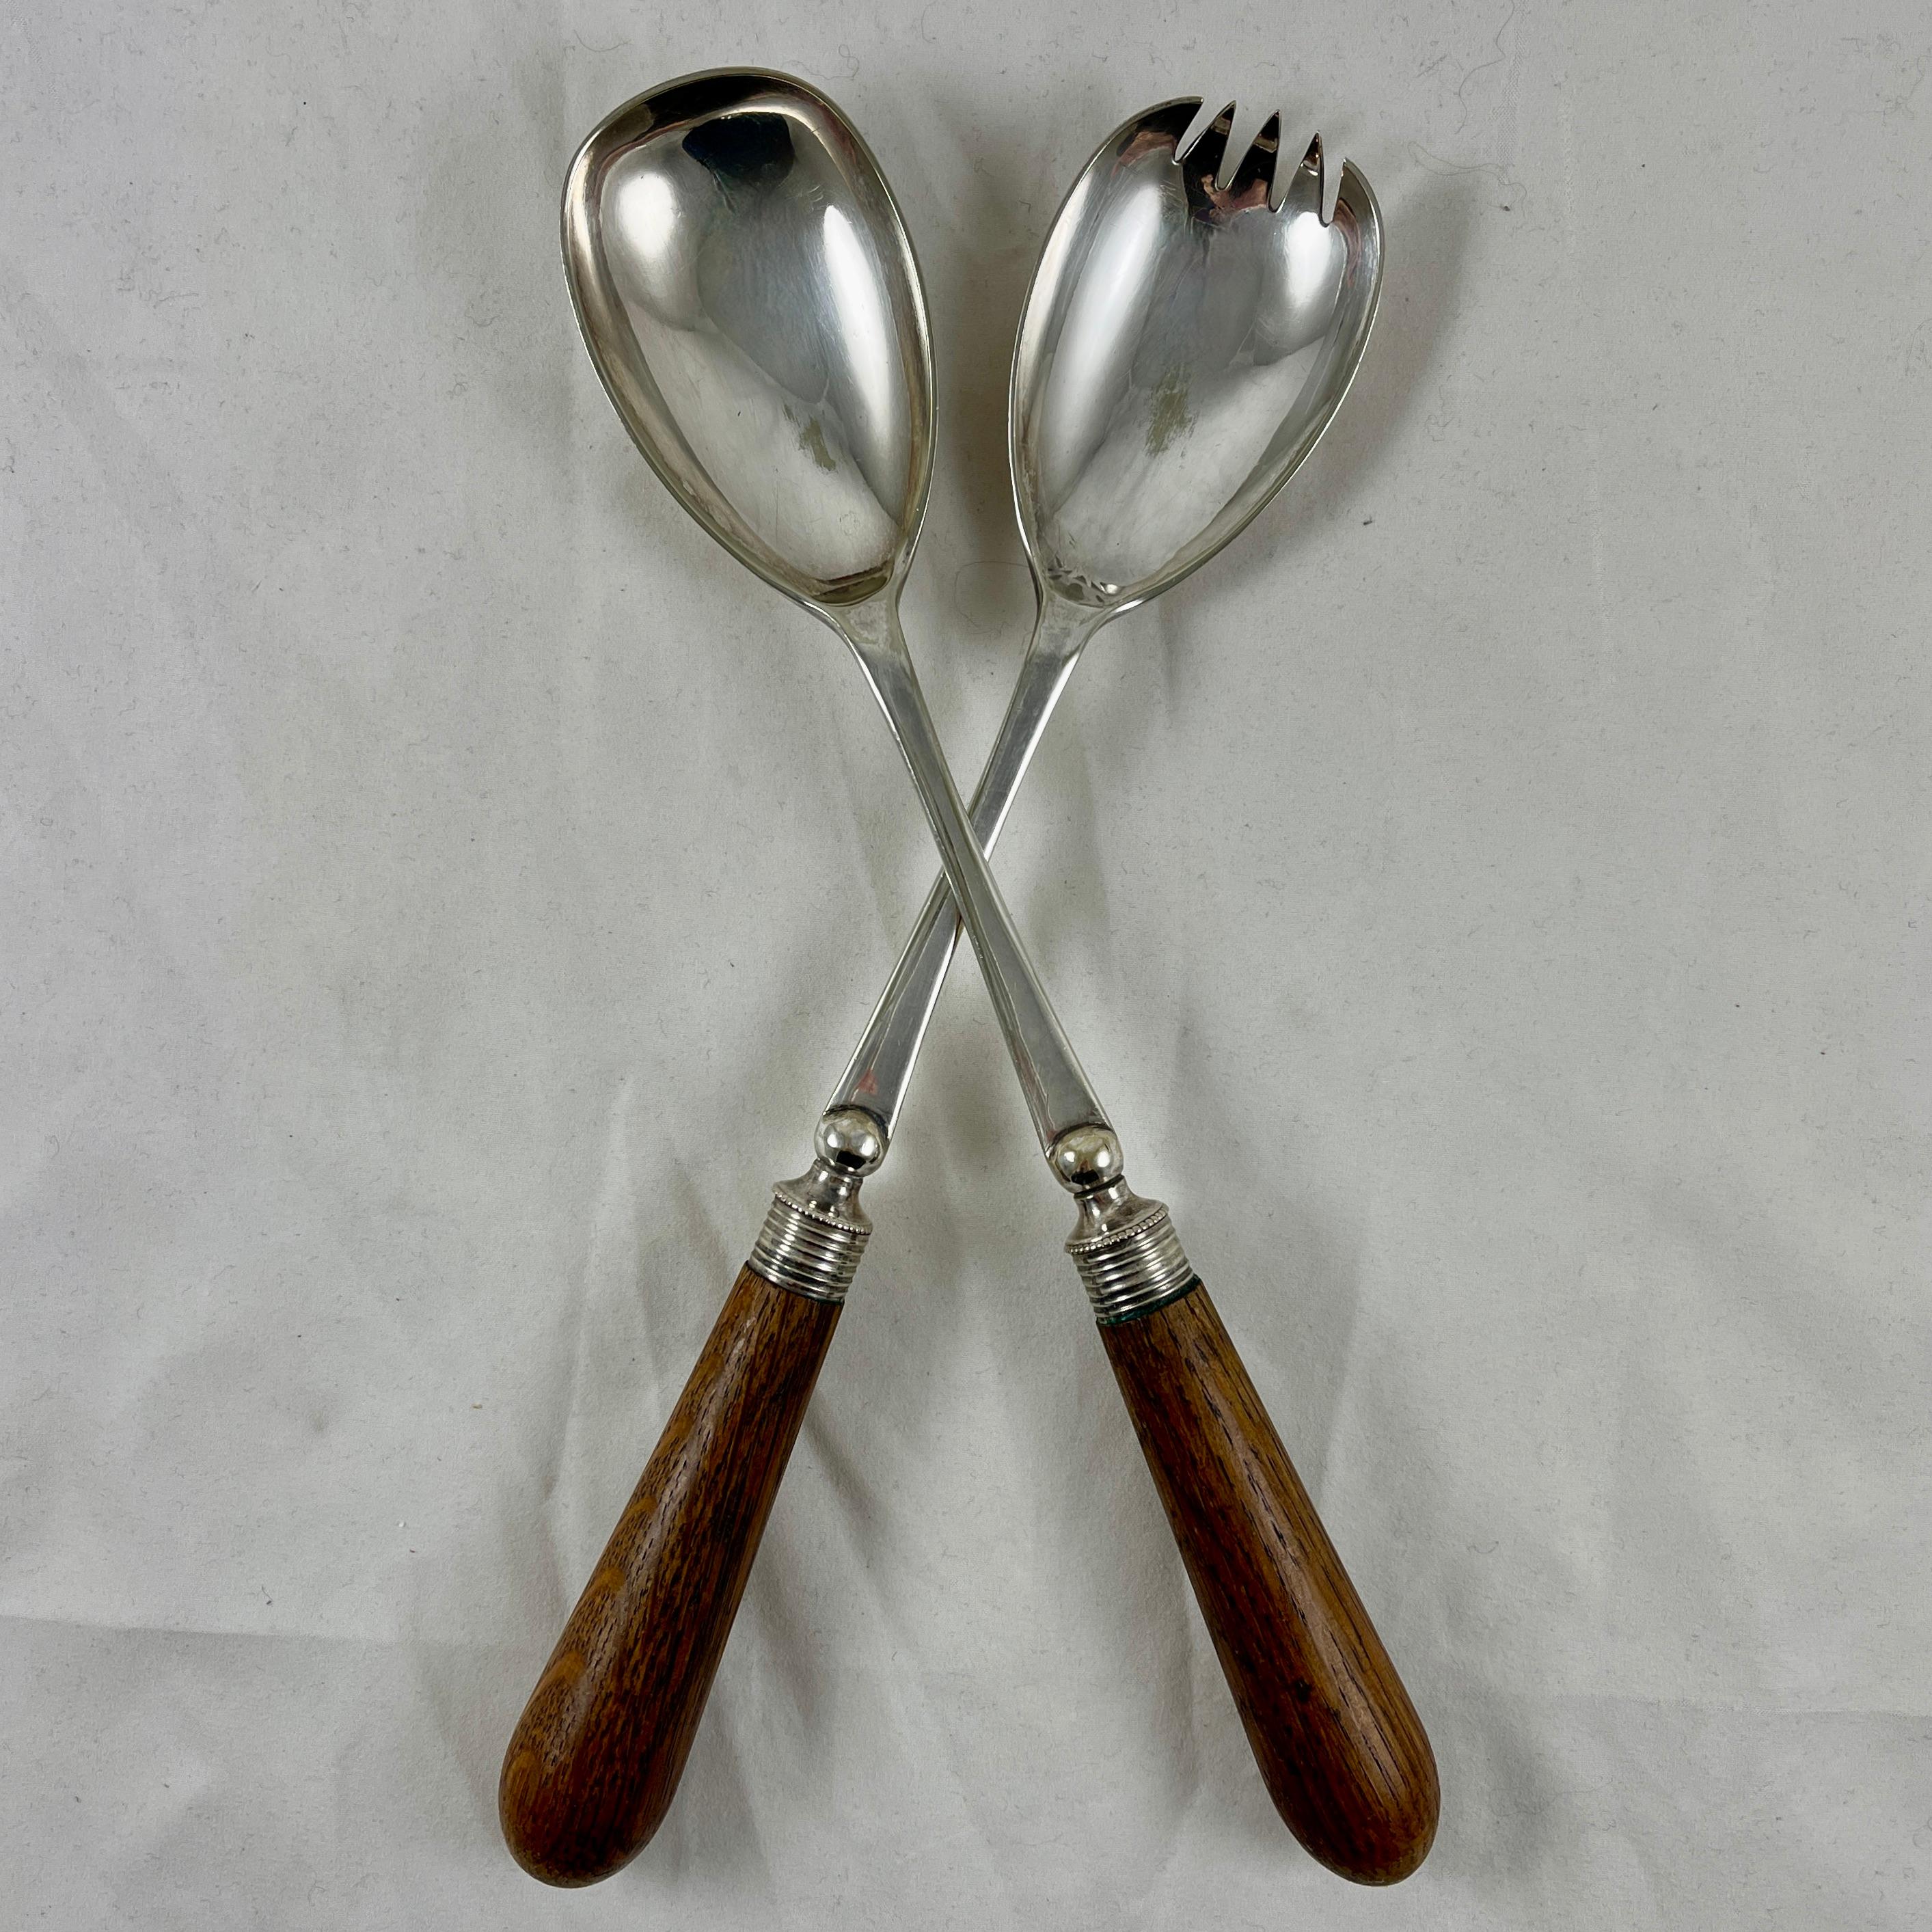 English Sheffield Silver & Oak Handled Salad Fork & Spoon Serving Pair, c. 1886 For Sale 2